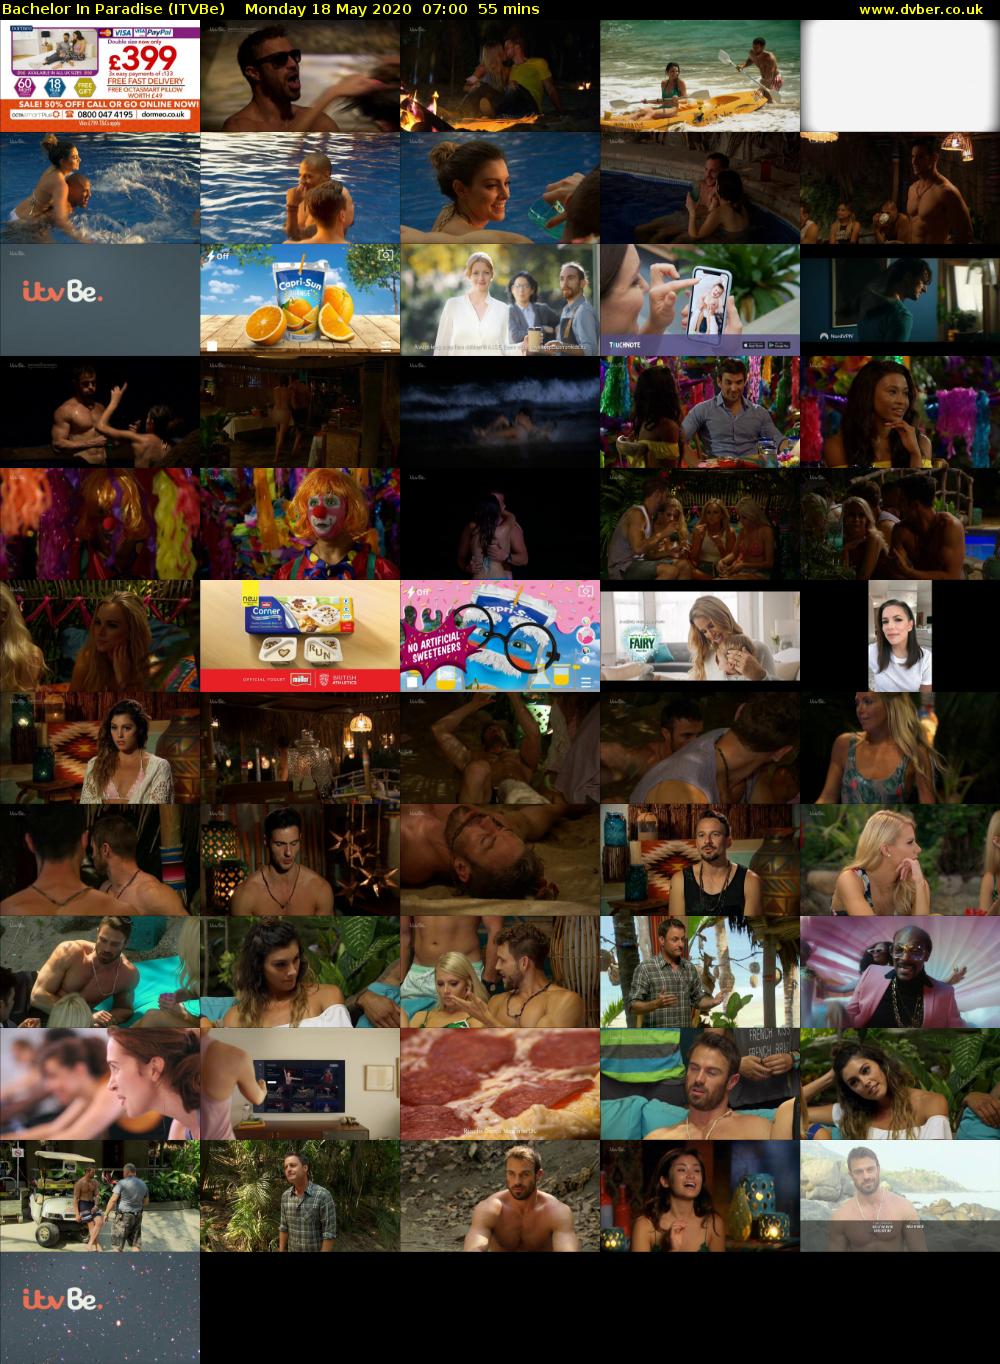 Bachelor in Paradise (ITVBe) Monday 18 May 2020 07:00 - 07:55